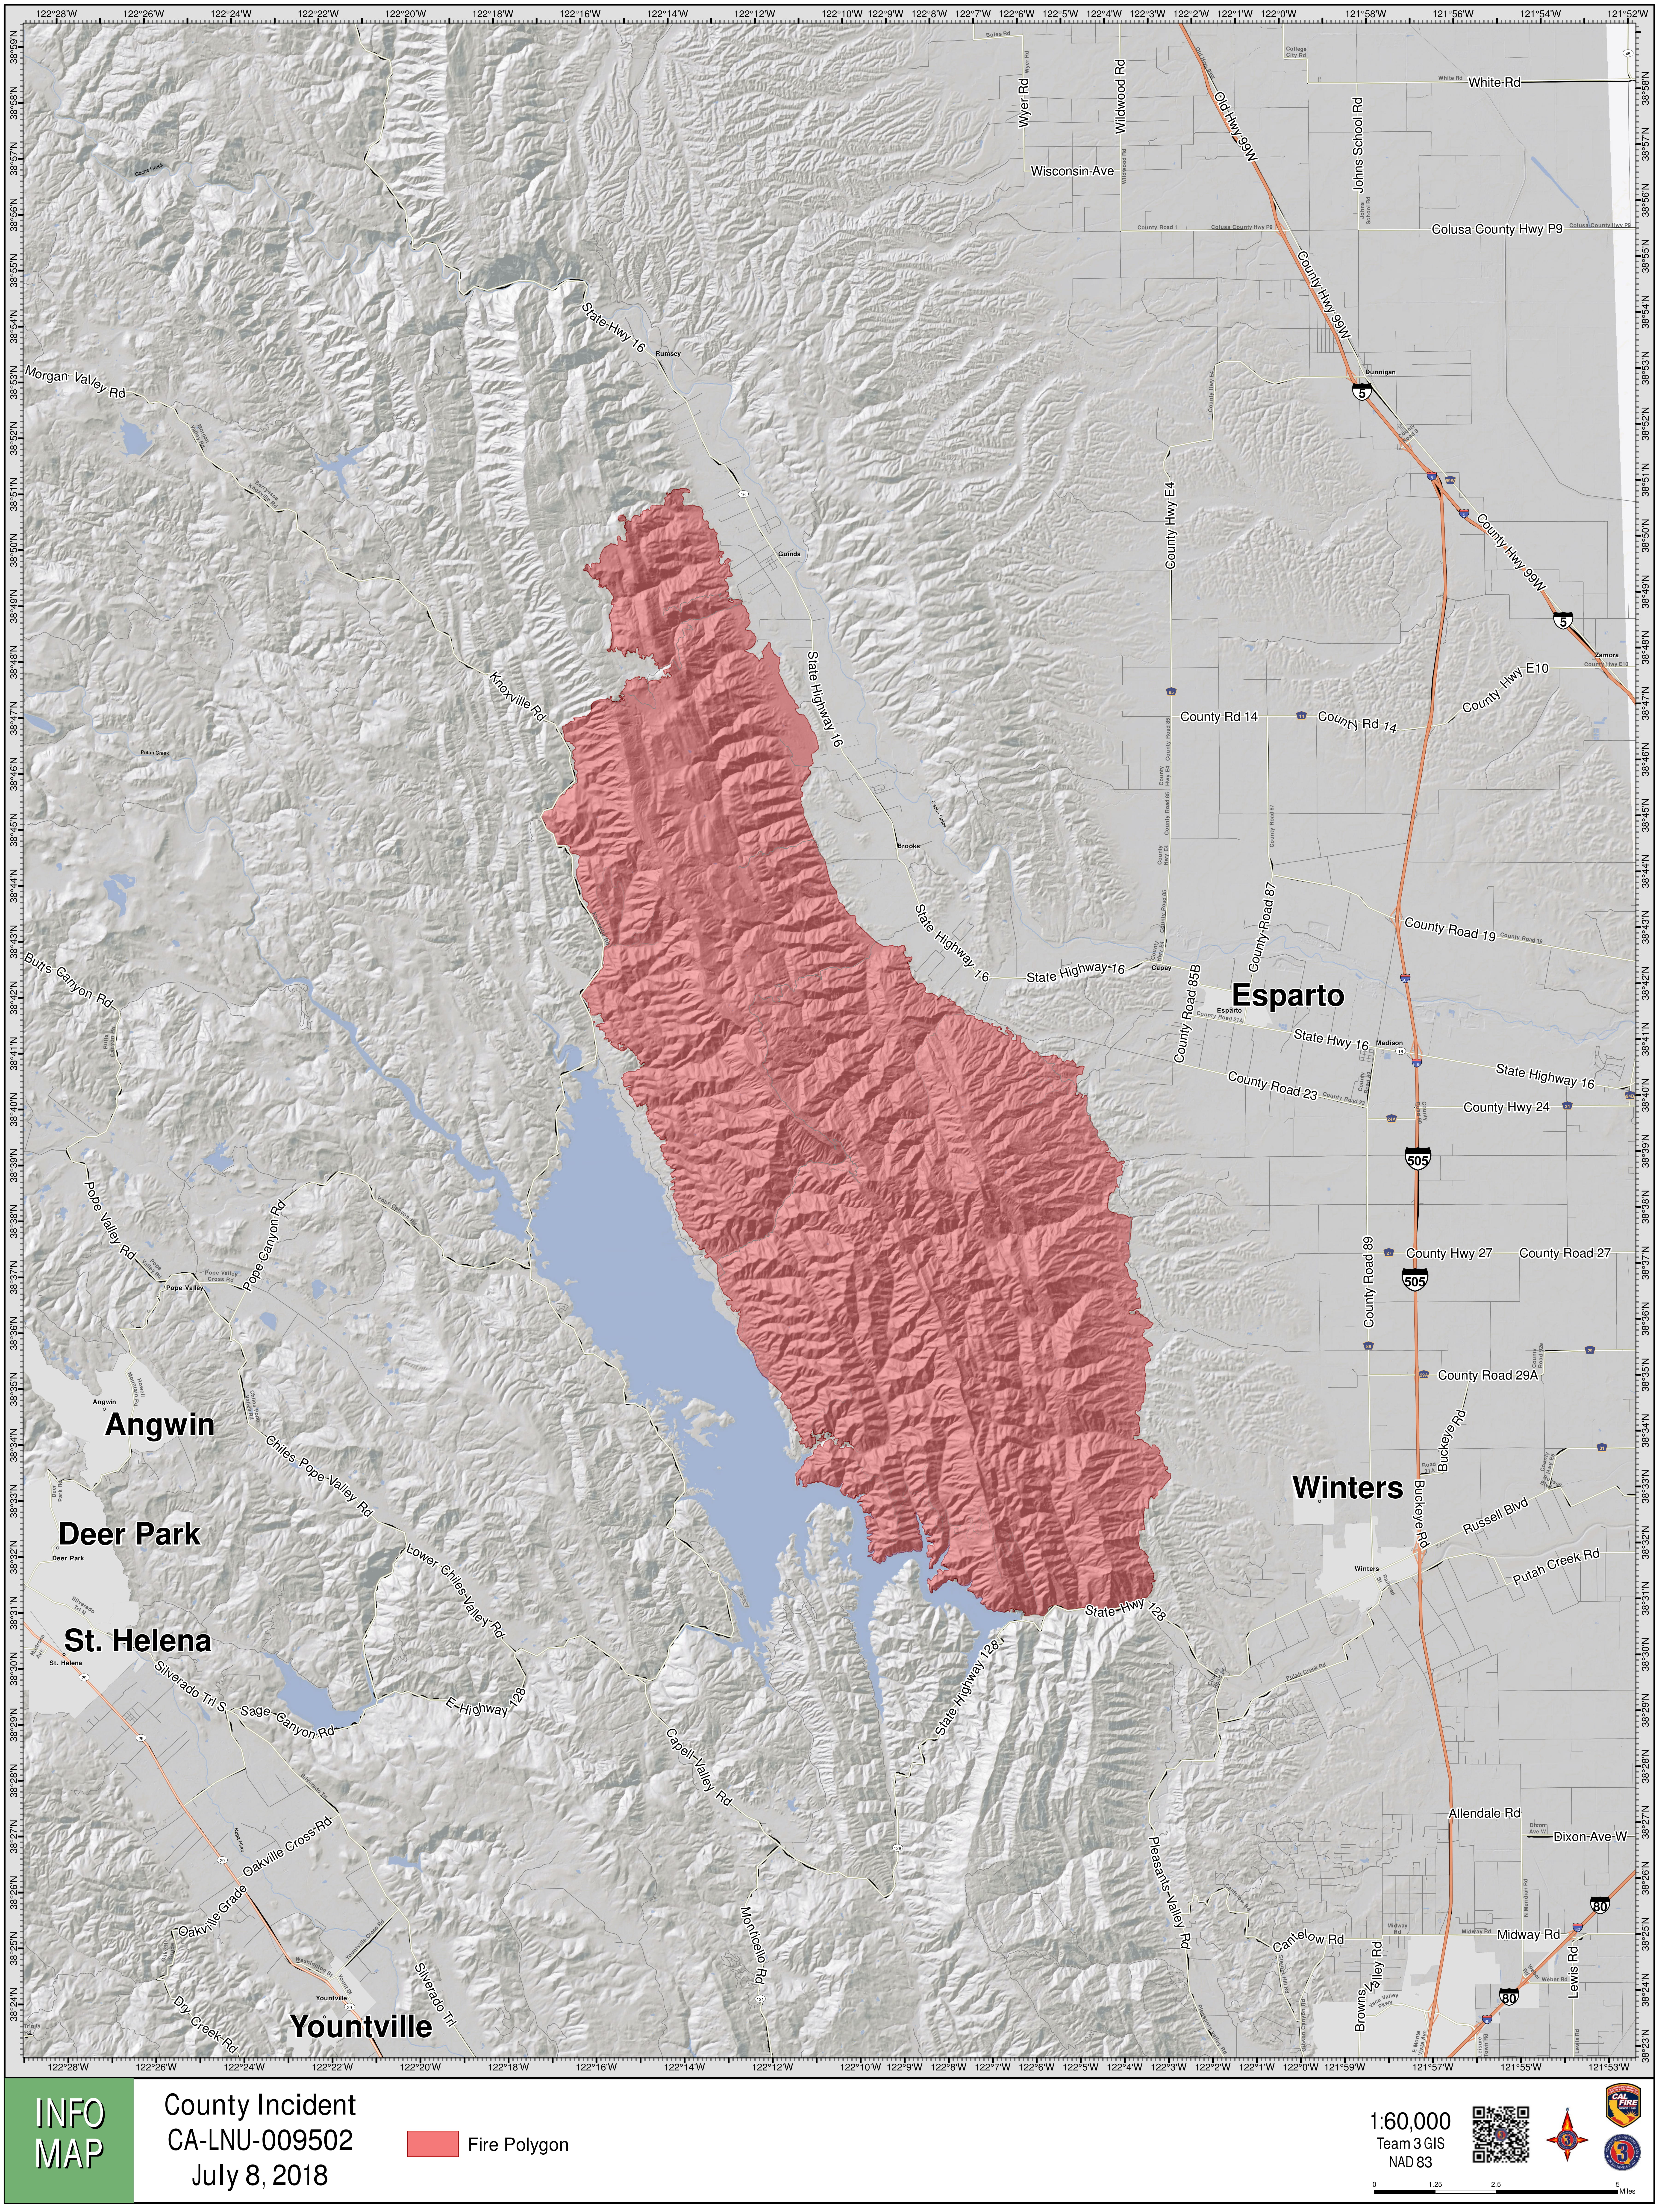 maps: a look at the 'county fire' burning in yolo, napa